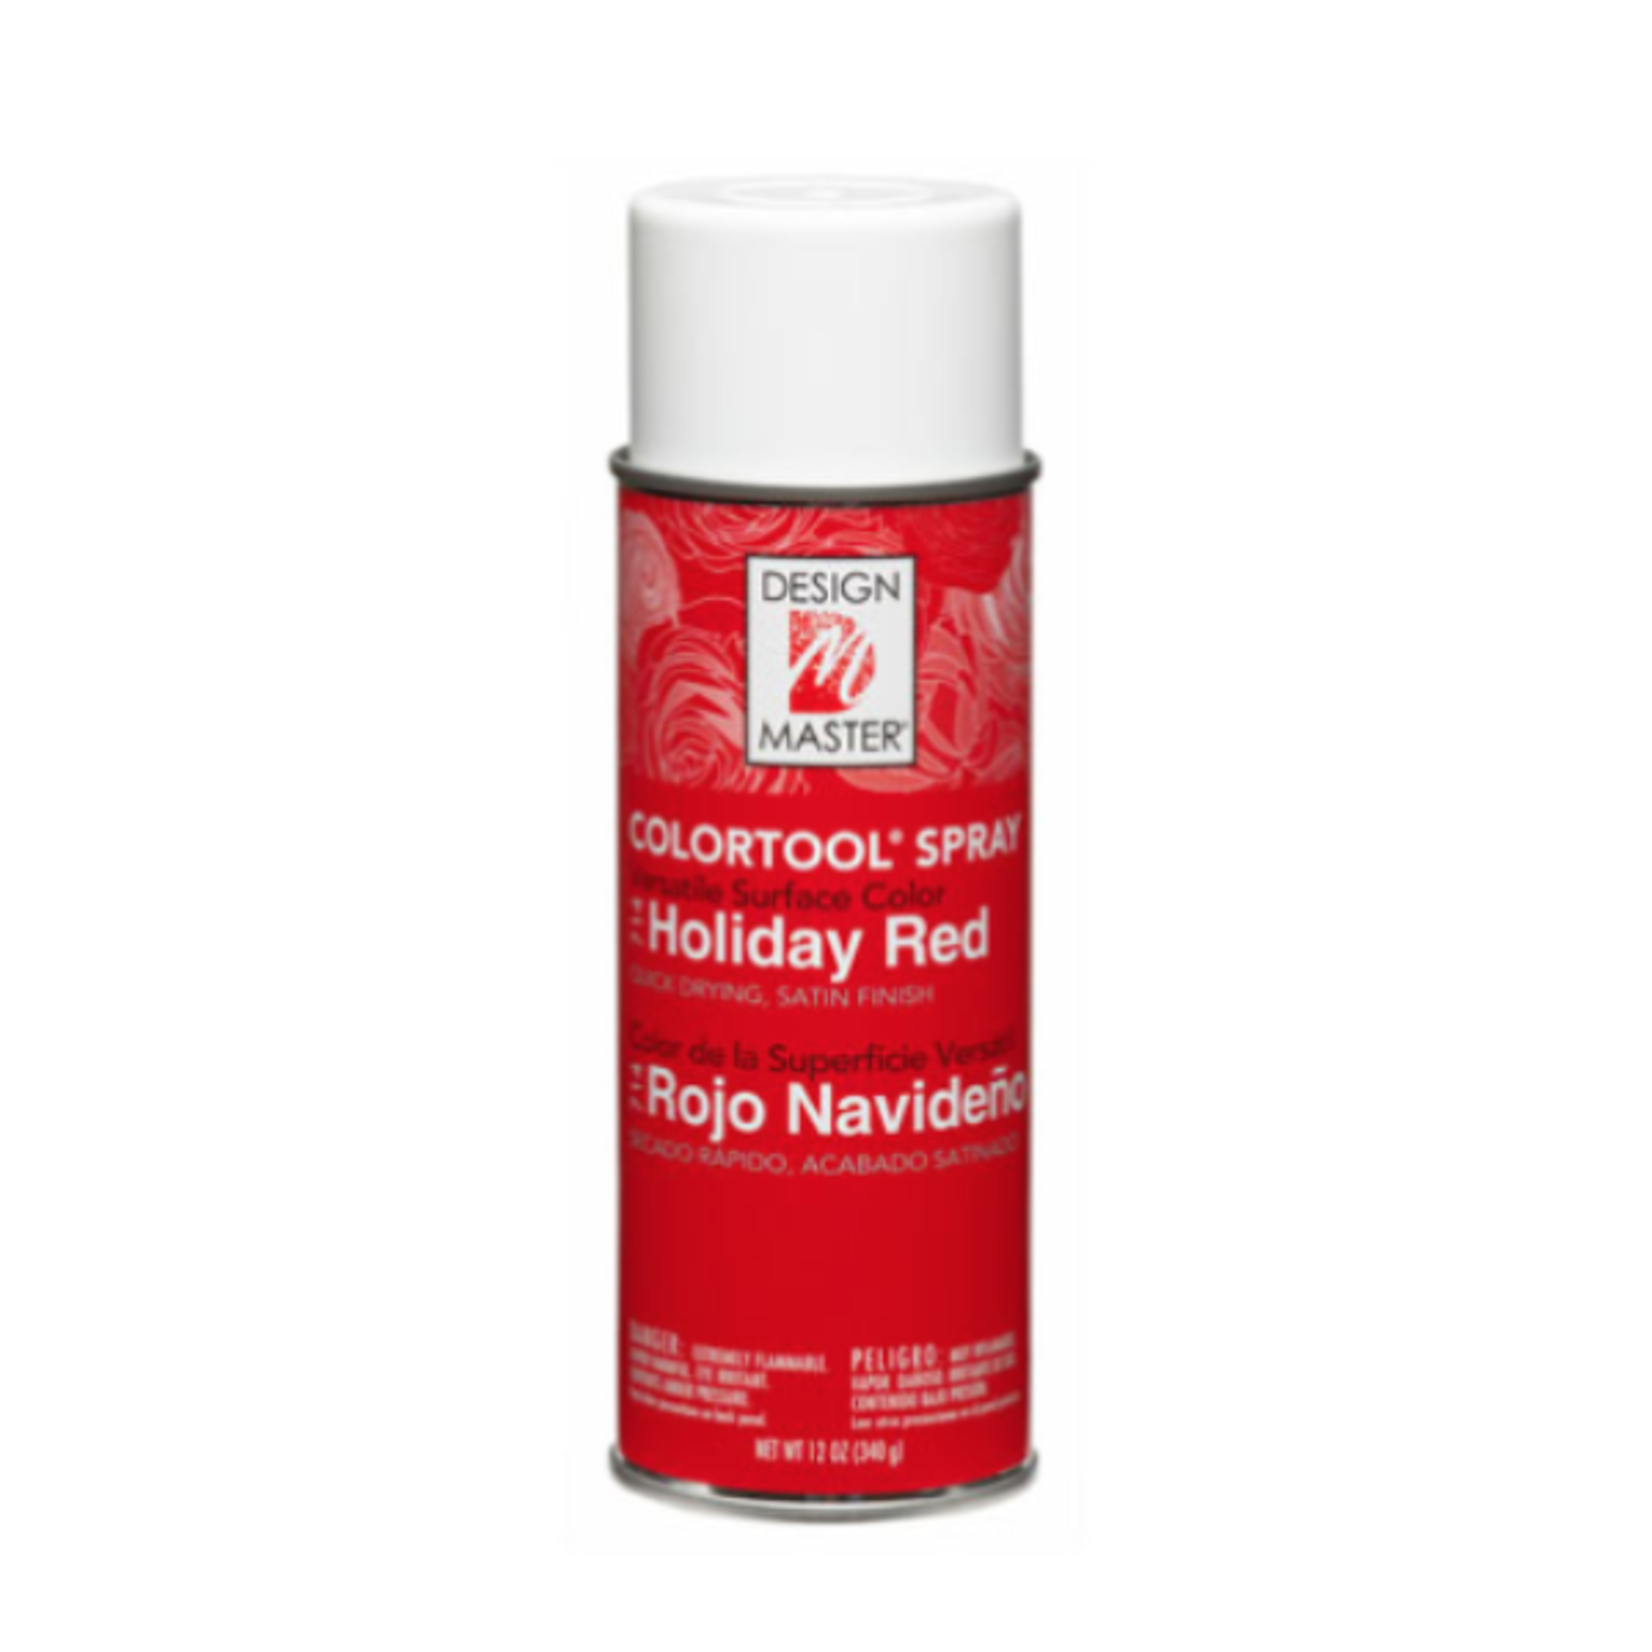 40% off was $14 now $8.39. 714 Colortool  holiday red